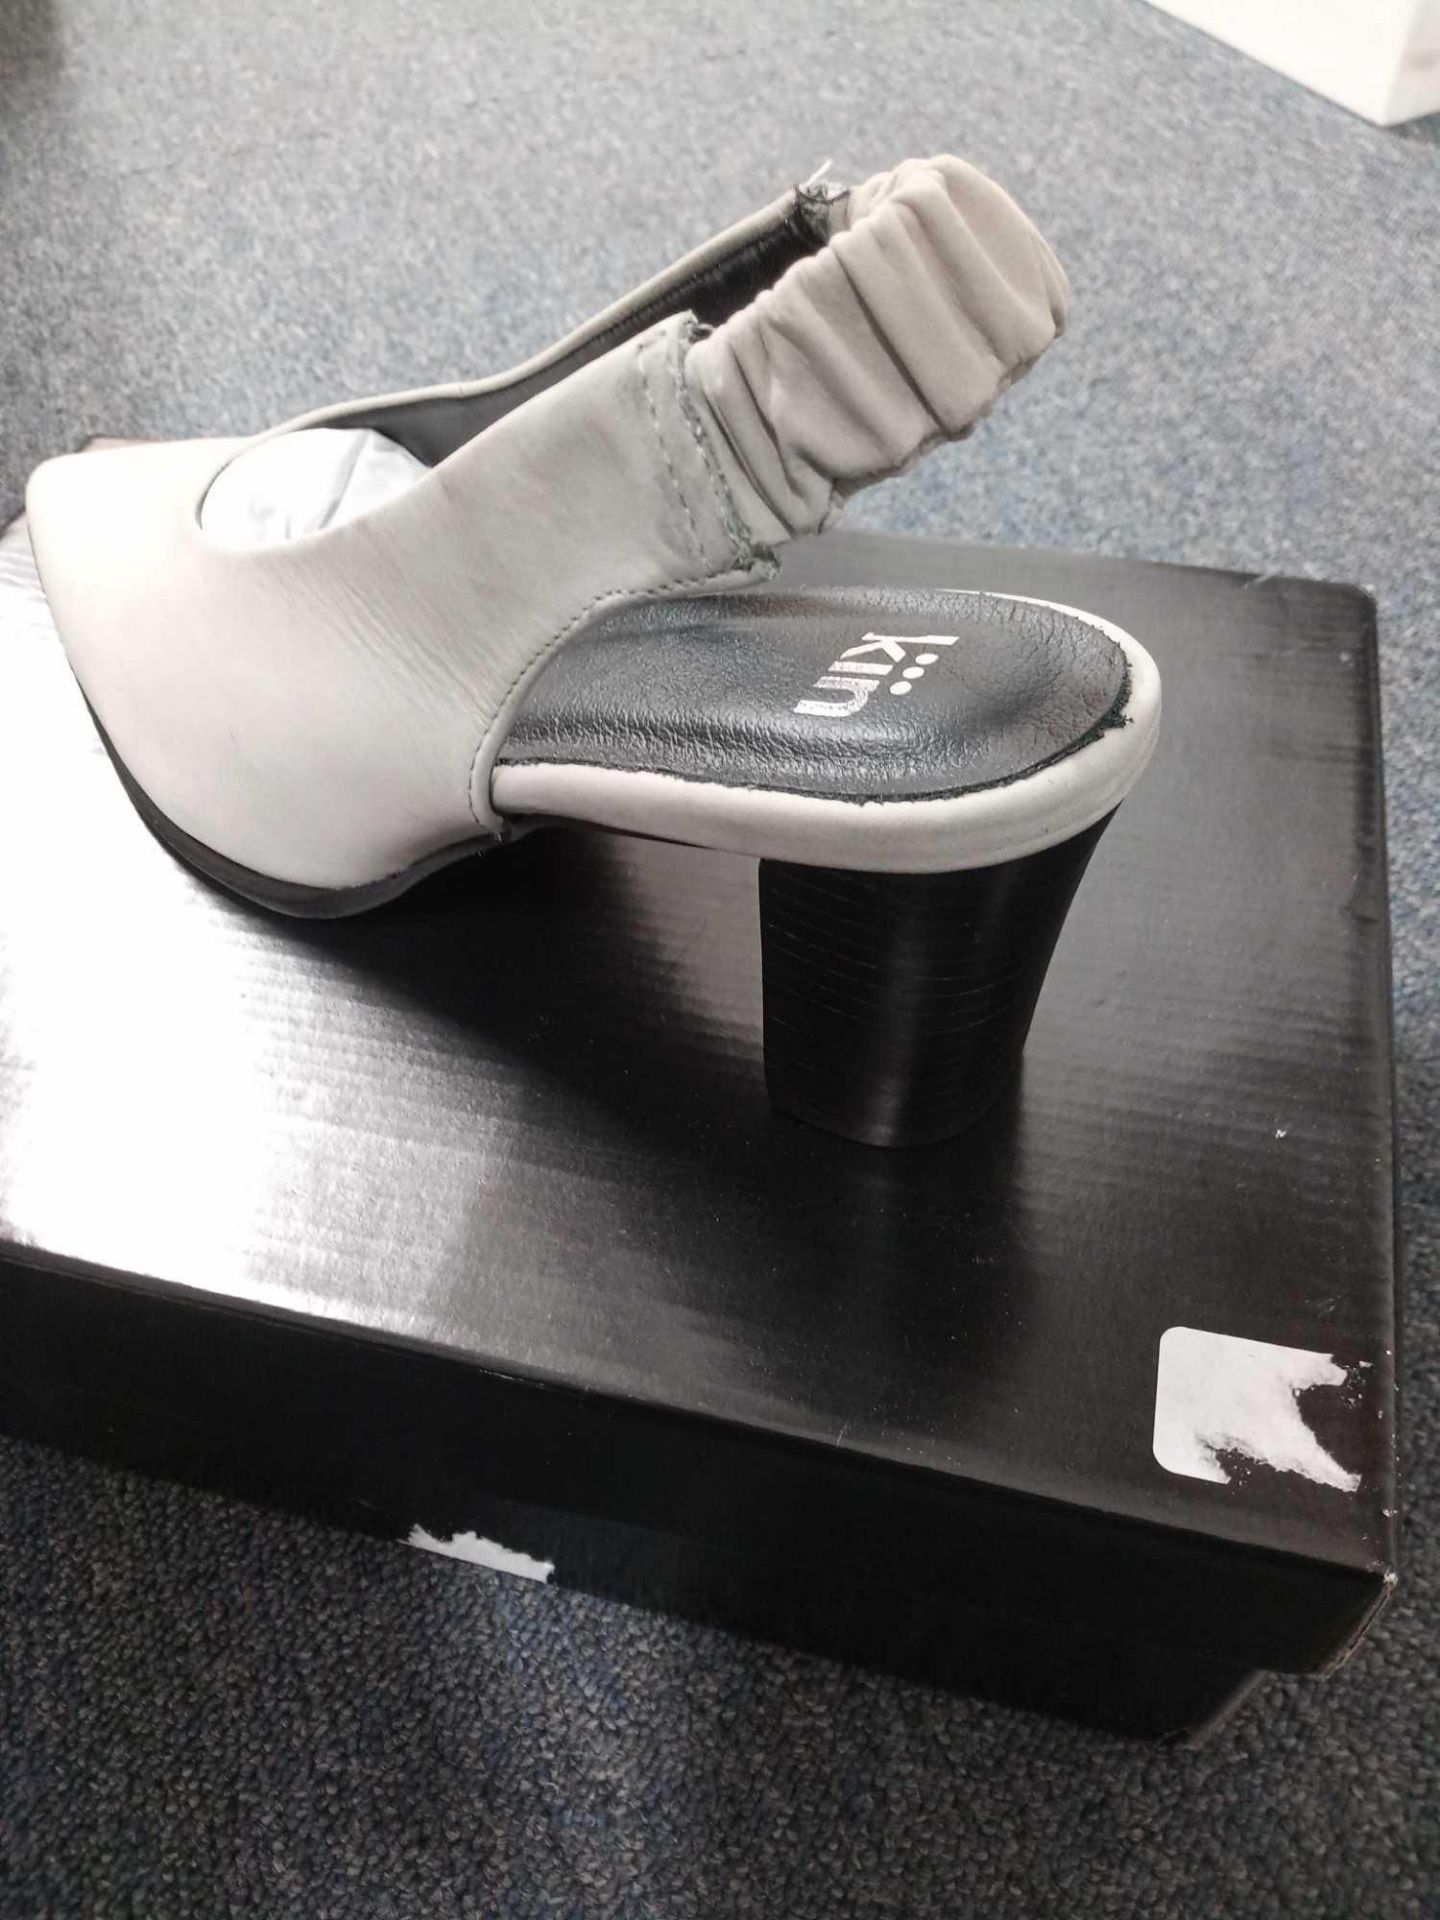 Ladies Kin Grey Heeled Sling Back Shoe Size 38 (5) (1425703)(Appraisals Available Upon Request) (Pic - Image 3 of 3